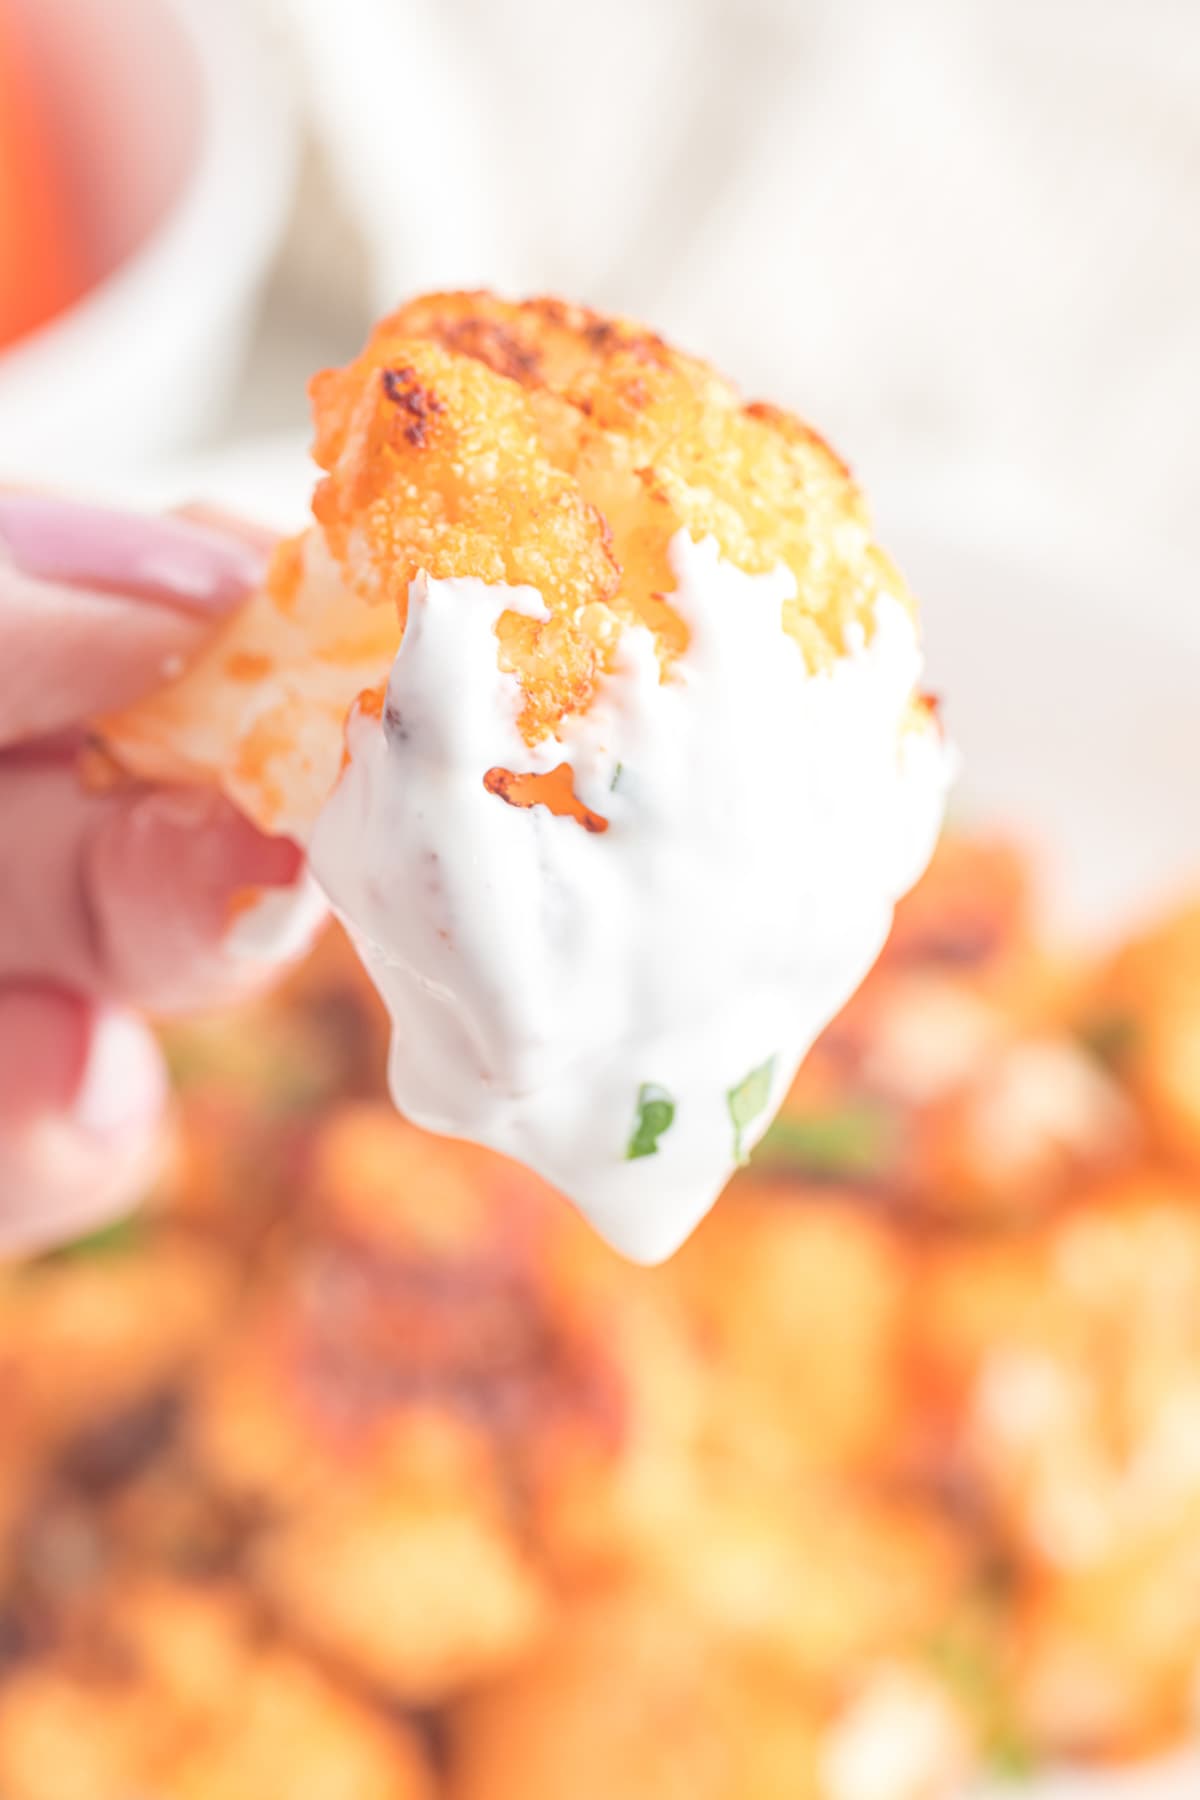 dipping cauliflower into the sour cream